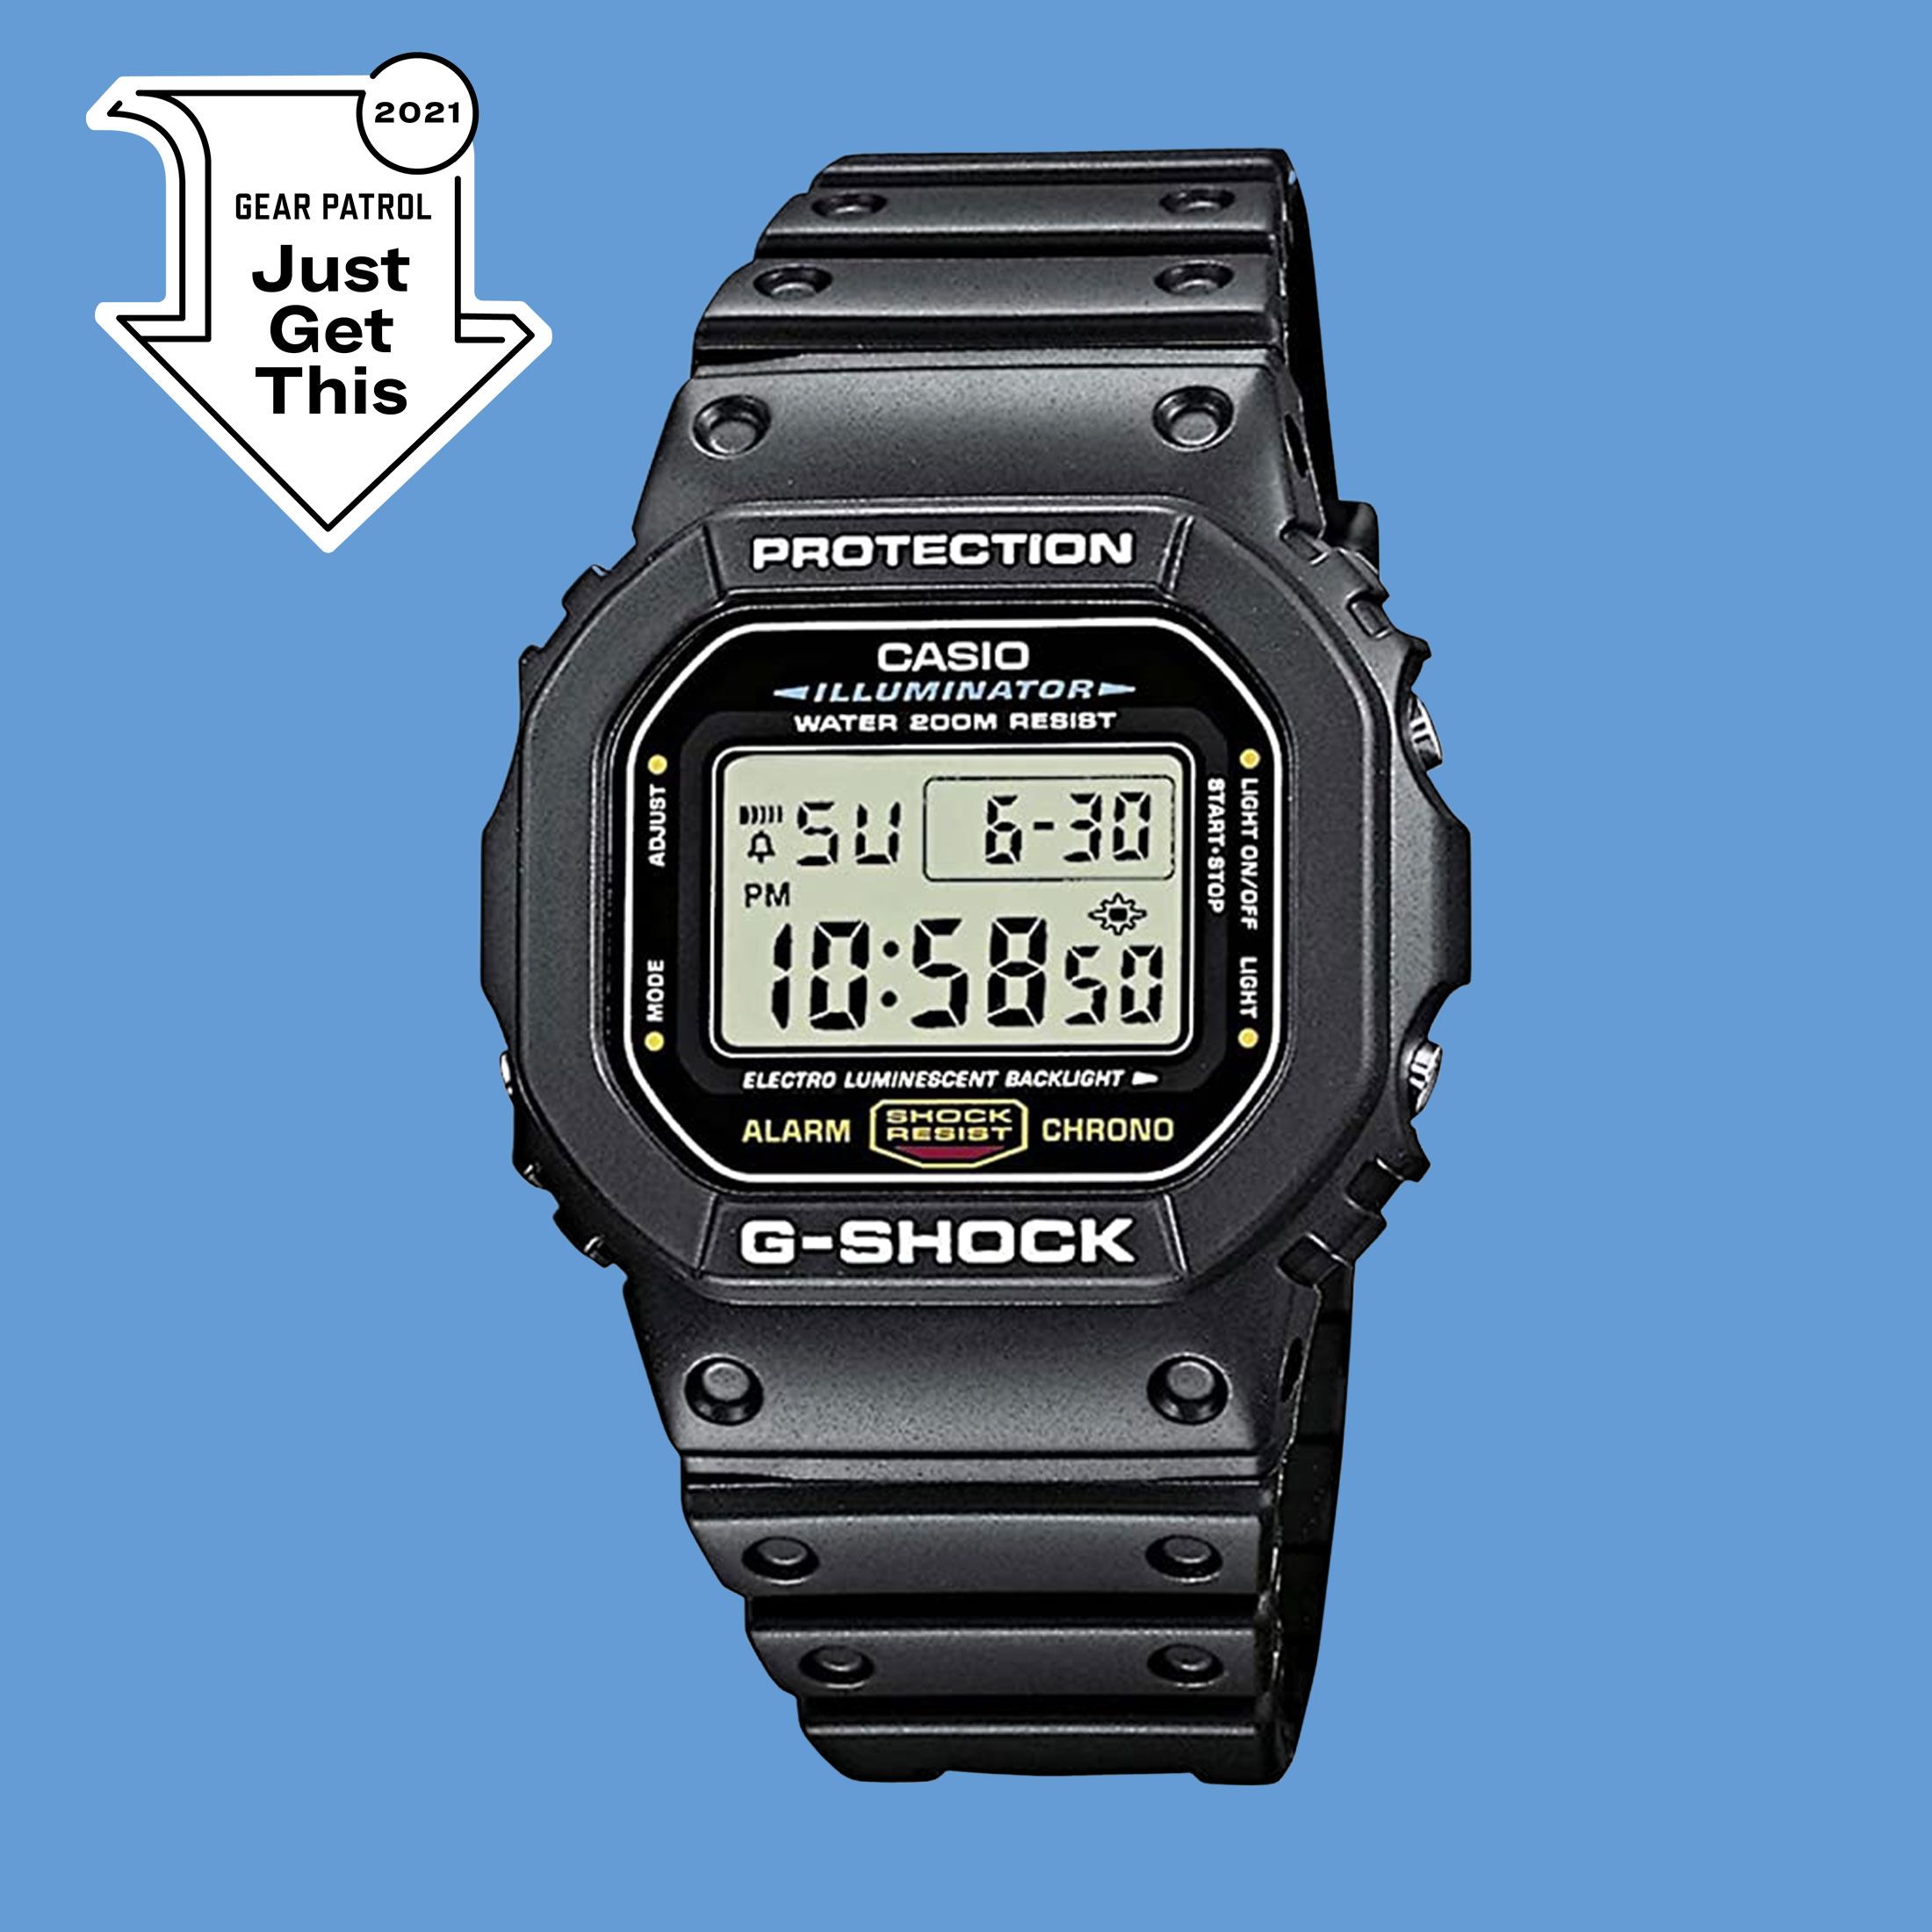 If You Only Buy One Digital Watch, Buy This One